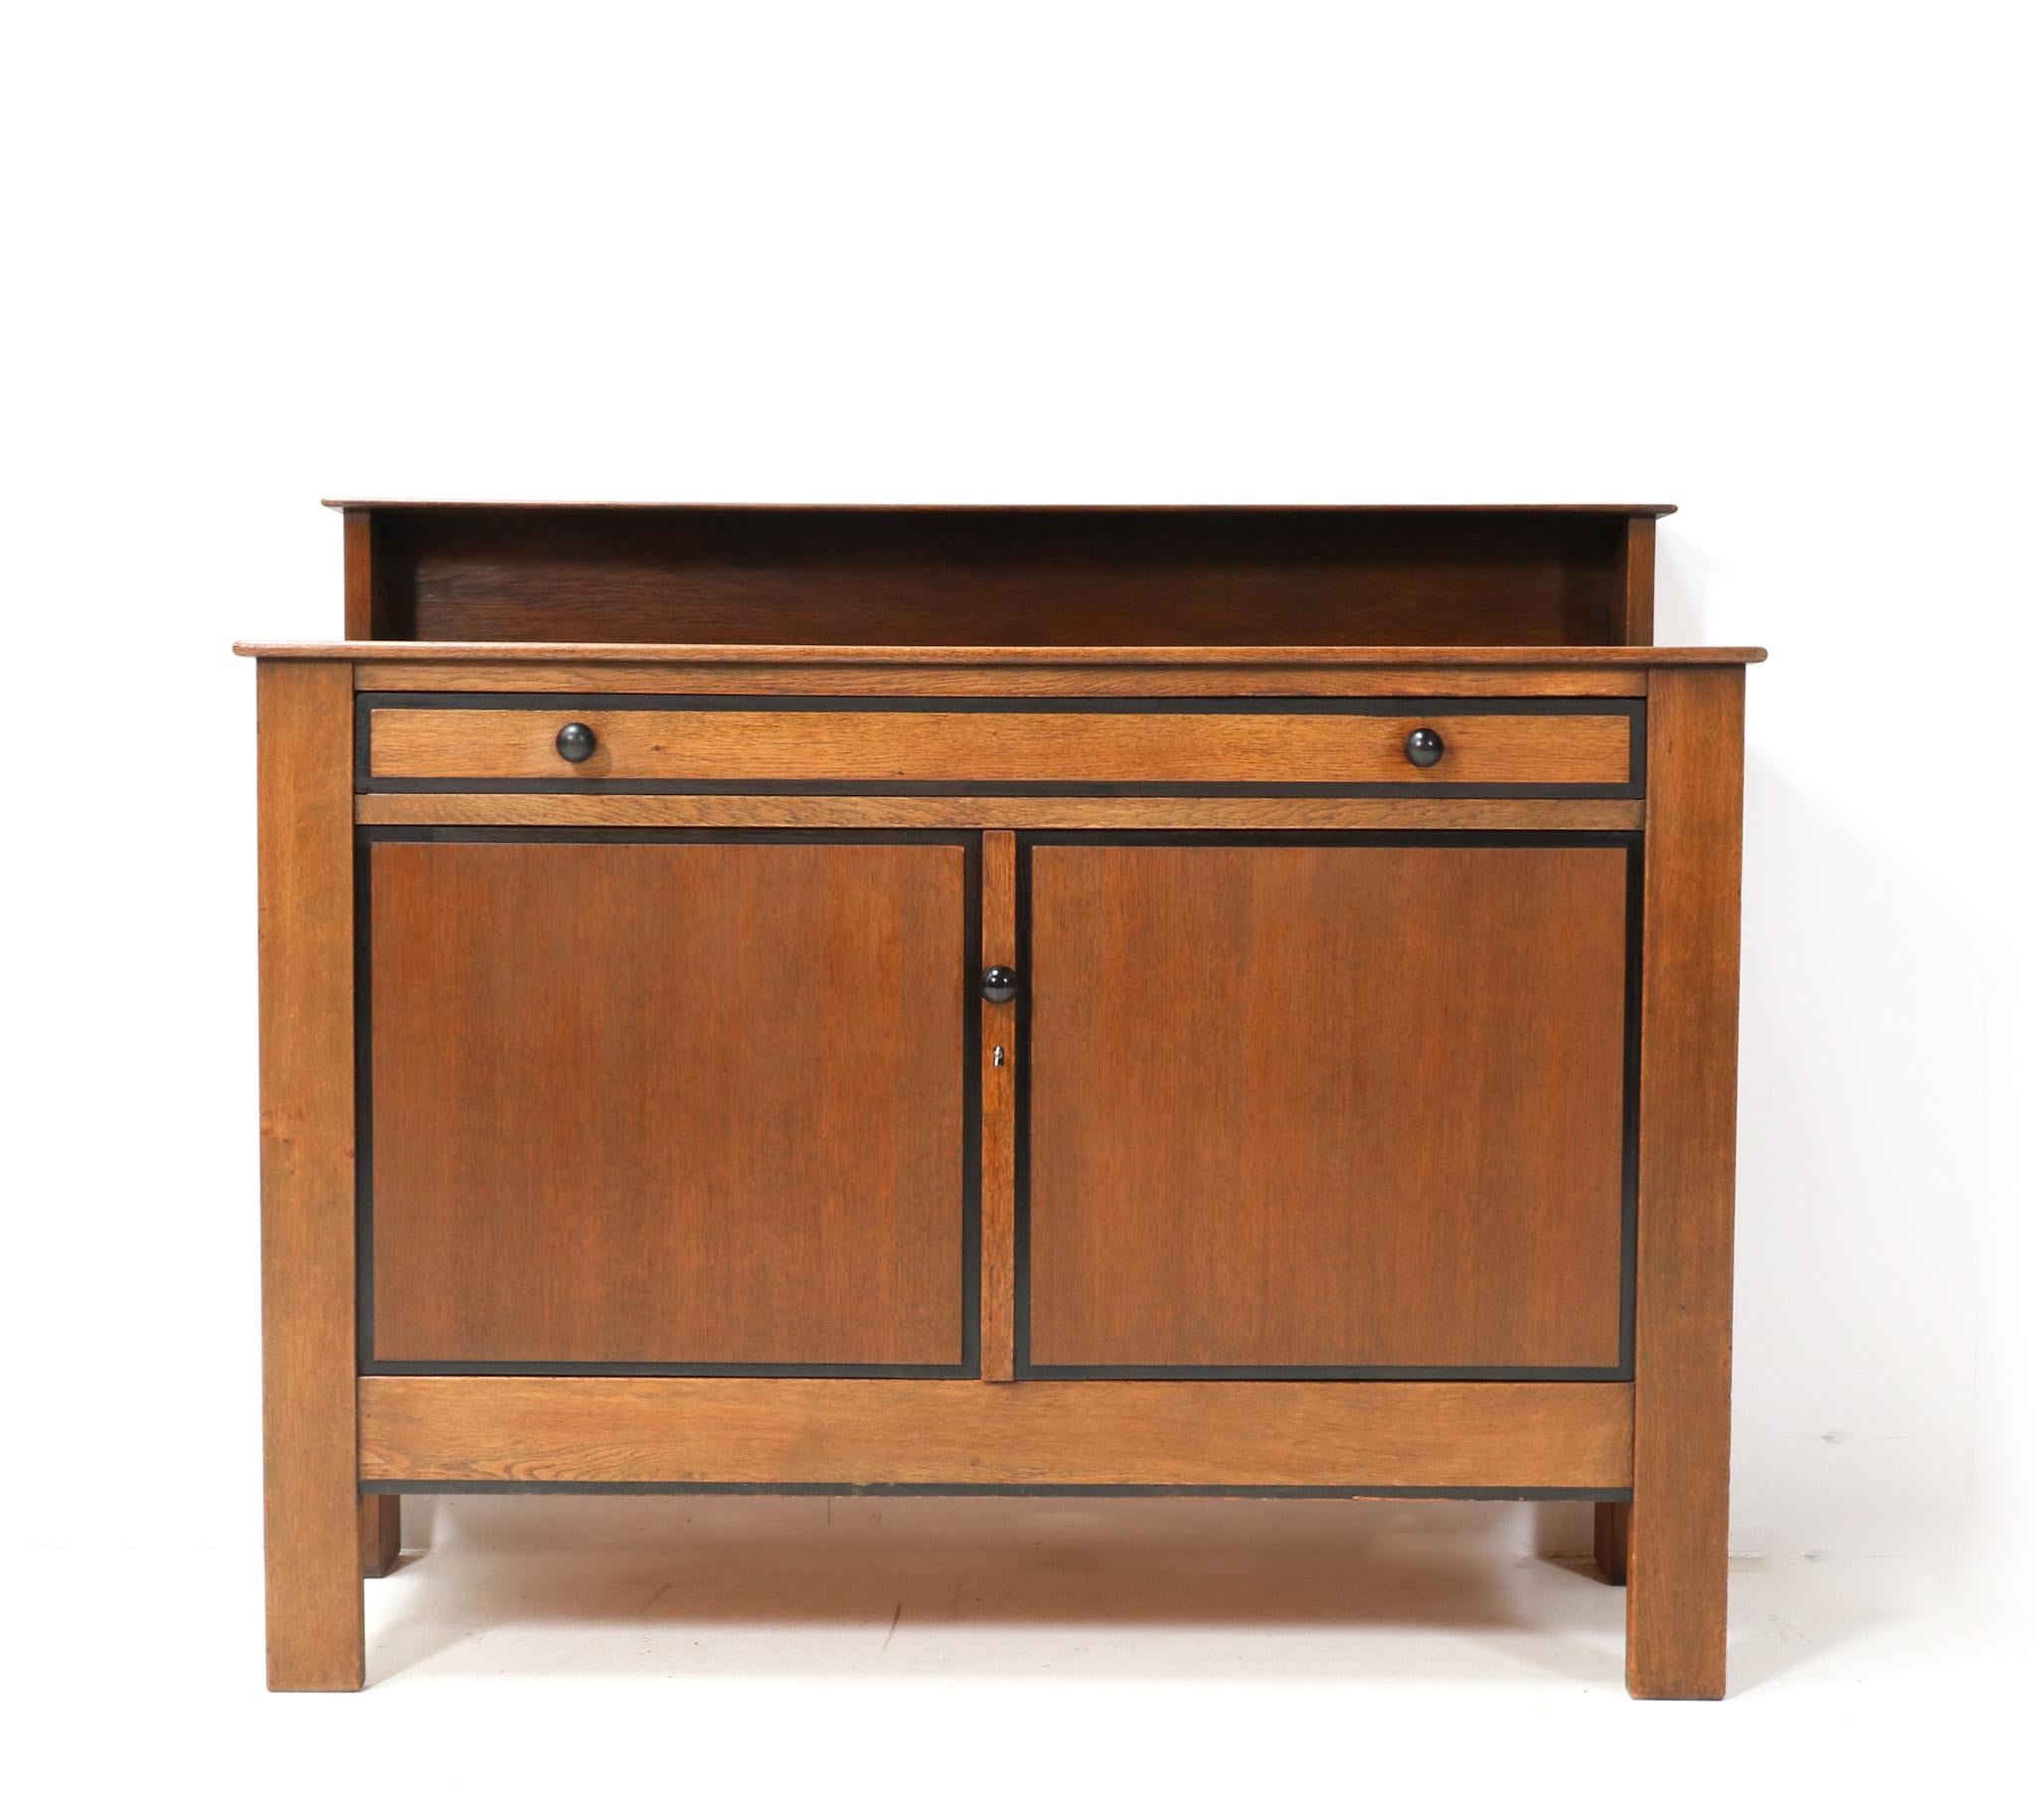 Stunning and decorative Art Deco Modernist credenza or sideboard.
Design by J.A. Muntendam for L.O.V. Oosterbeek.
Striking Dutch design from the 1920s.
Solid oak with original solid macassar ebony knobs on drawer and door.
In very good original